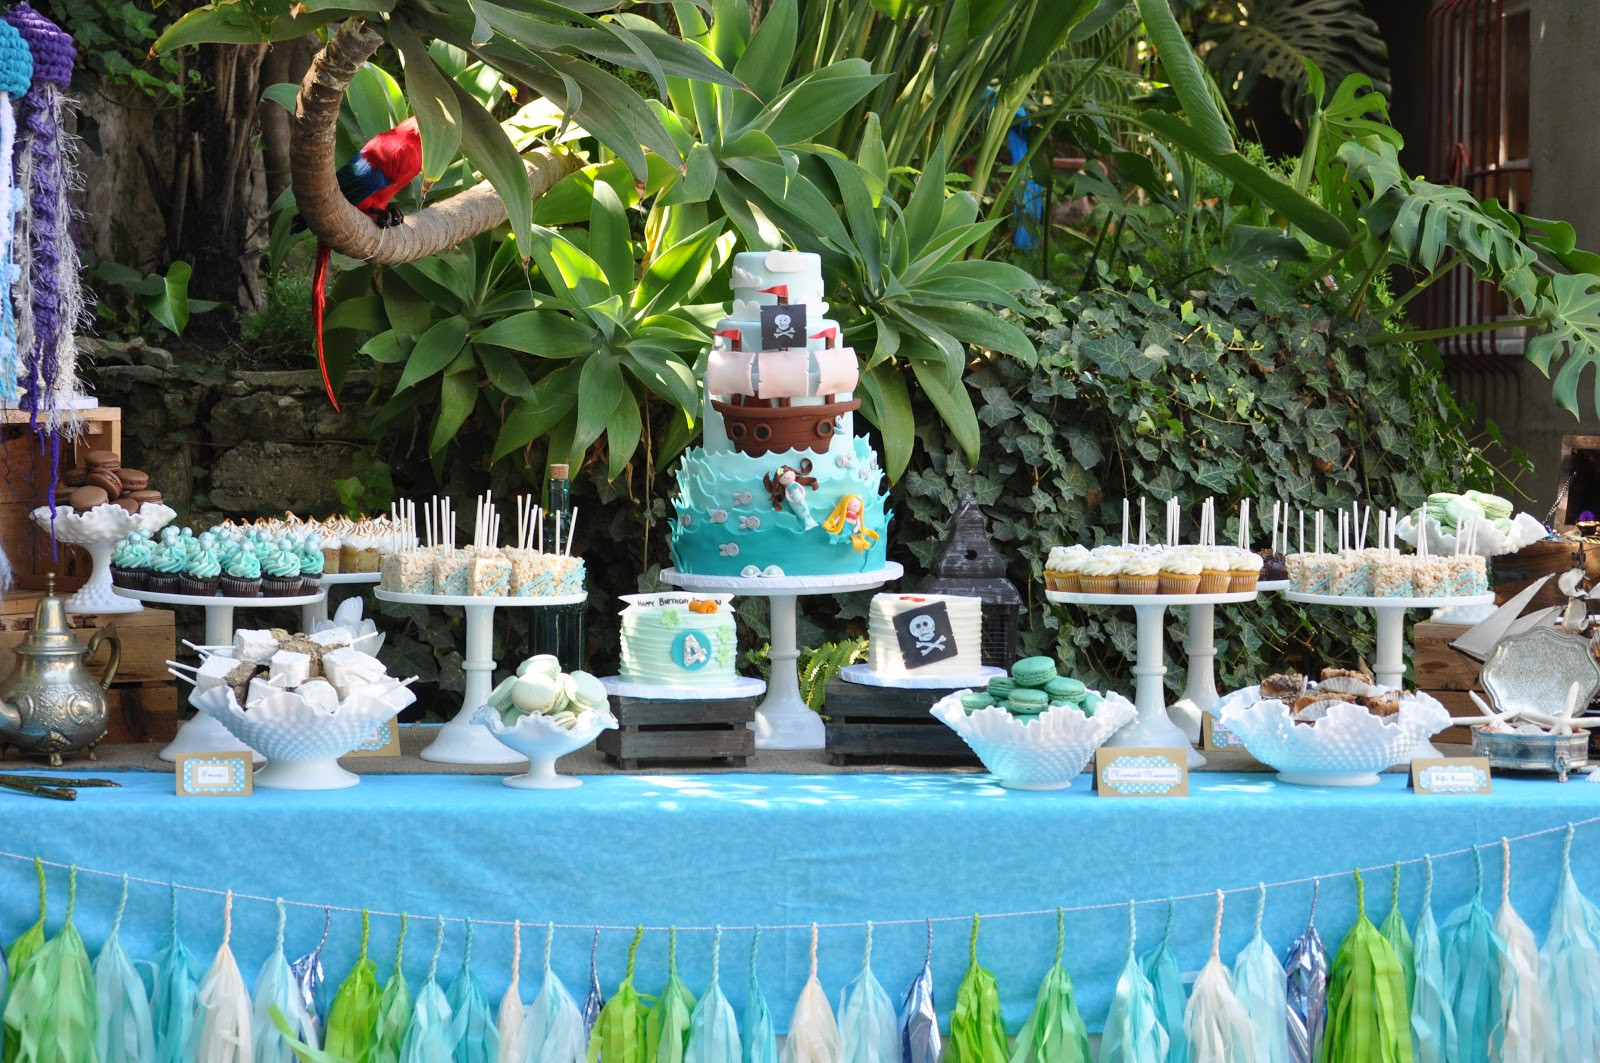 Pirate And Mermaid Party Ideas
 A Pirate and Mermaid Party